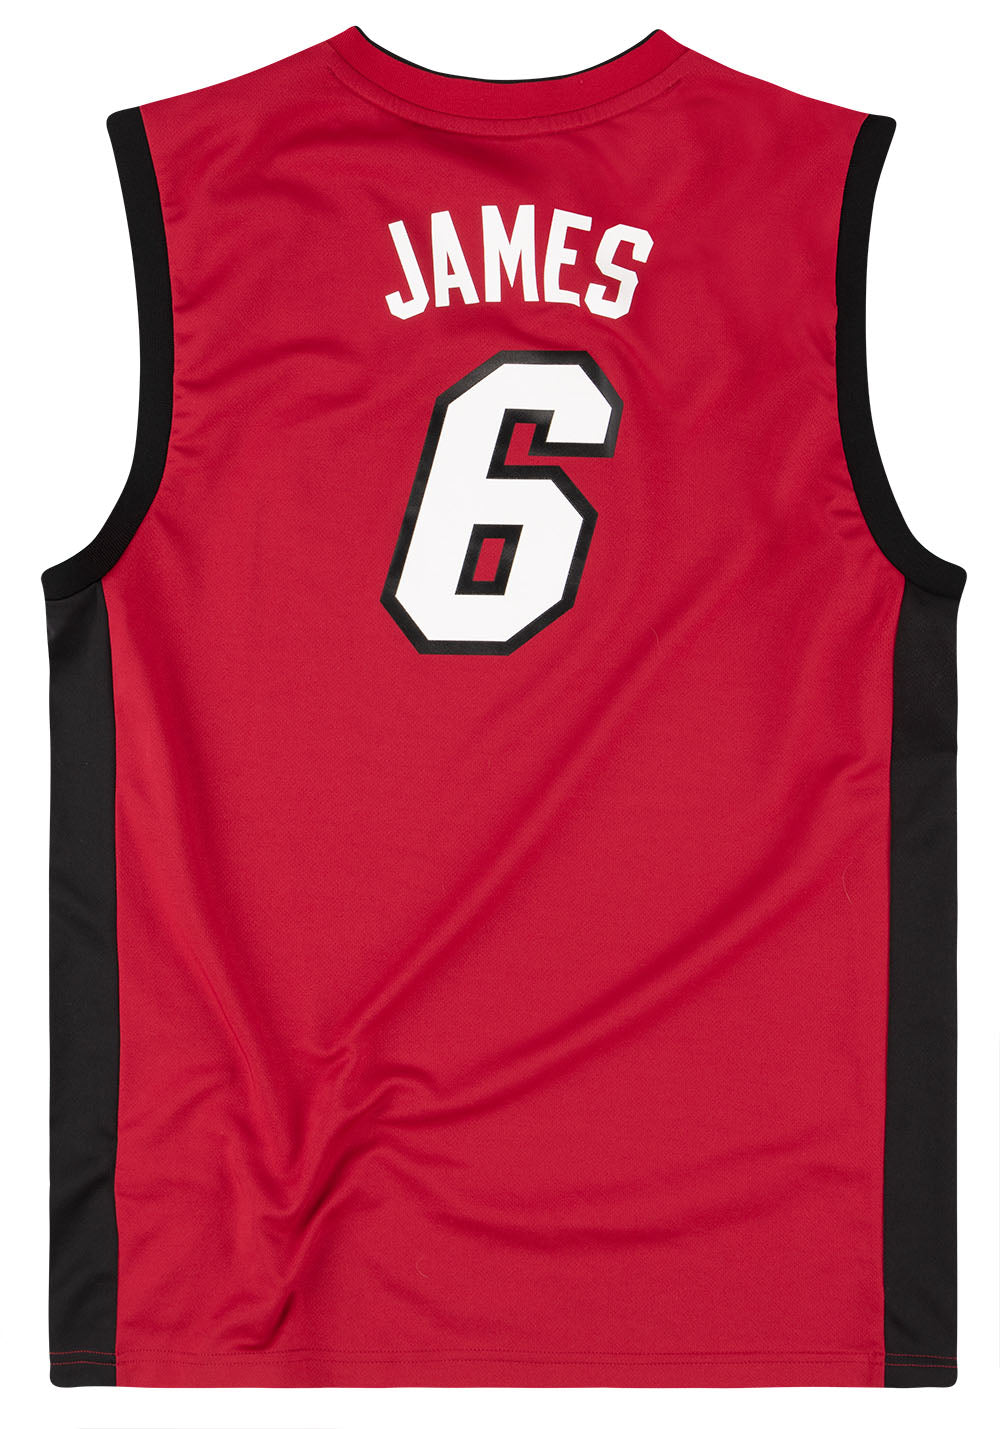 Lebron James Miami Heat Jersey : Famous basketball team and player jersey  on sale